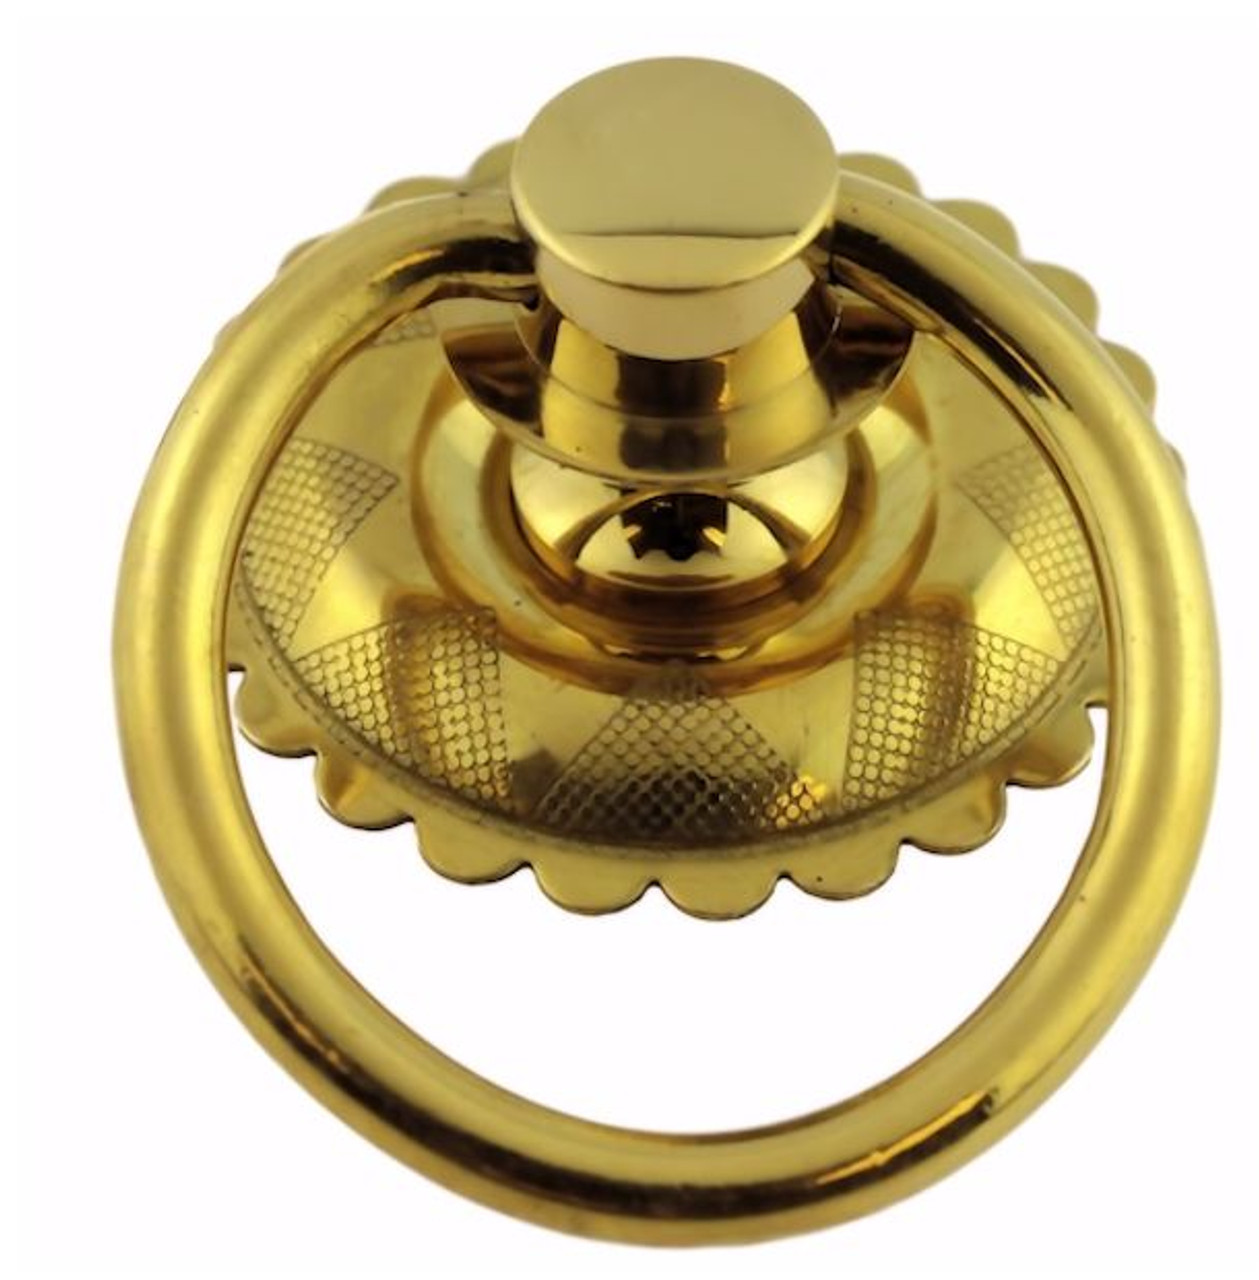 Mini Brass Padlocks Set of 6 with Key Lock All Purpose 1 1/4 inch Household Uses, Gold